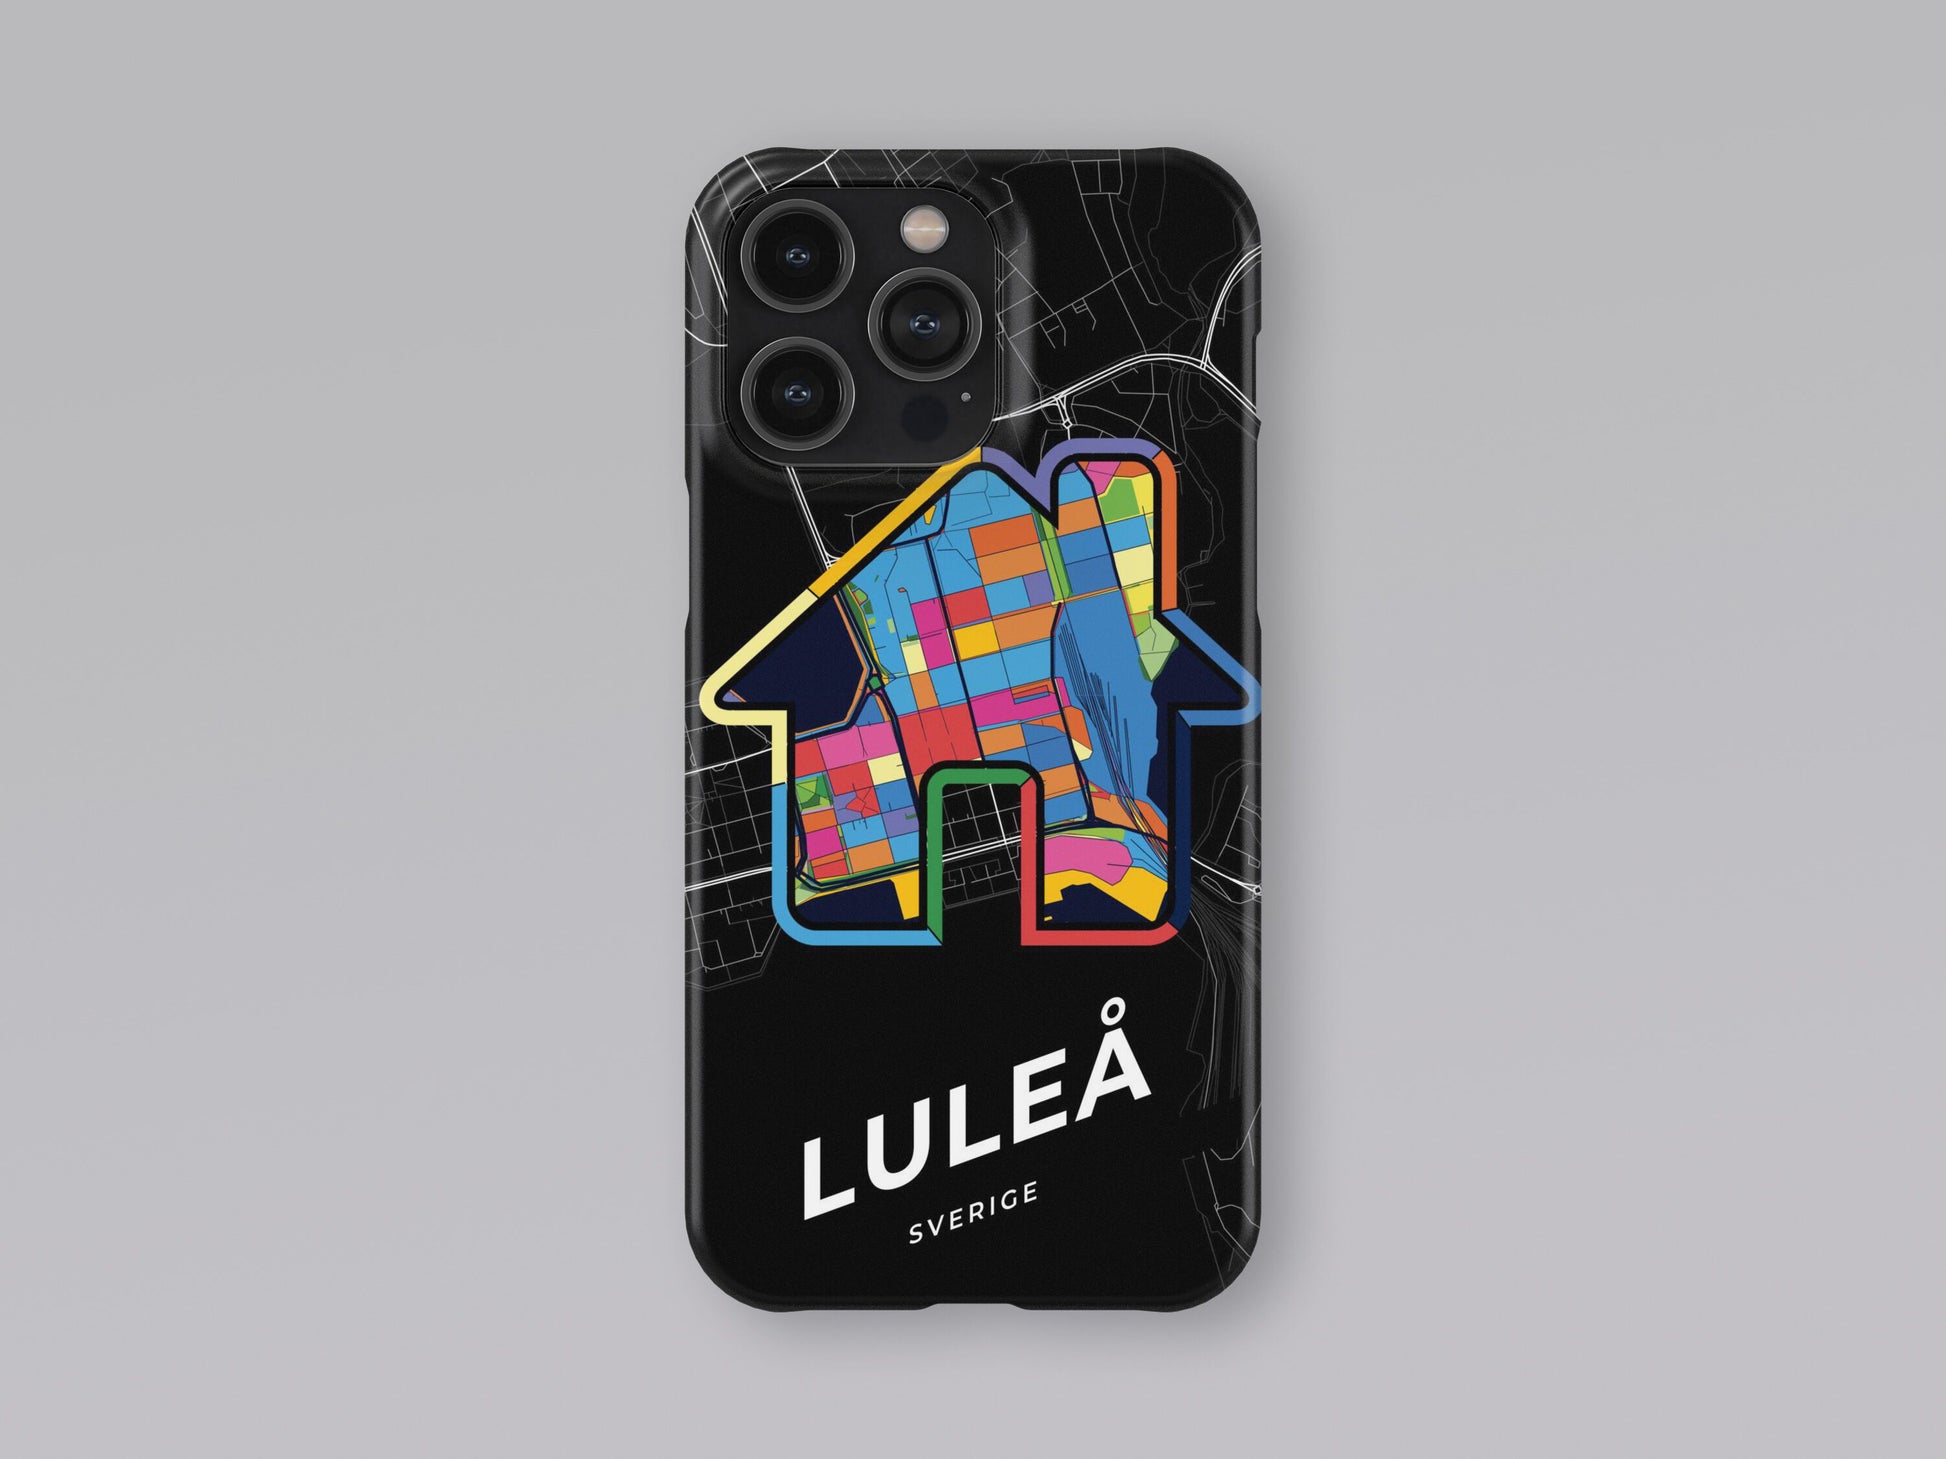 Luleå Sweden slim phone case with colorful icon. Birthday, wedding or housewarming gift. Couple match cases. 3